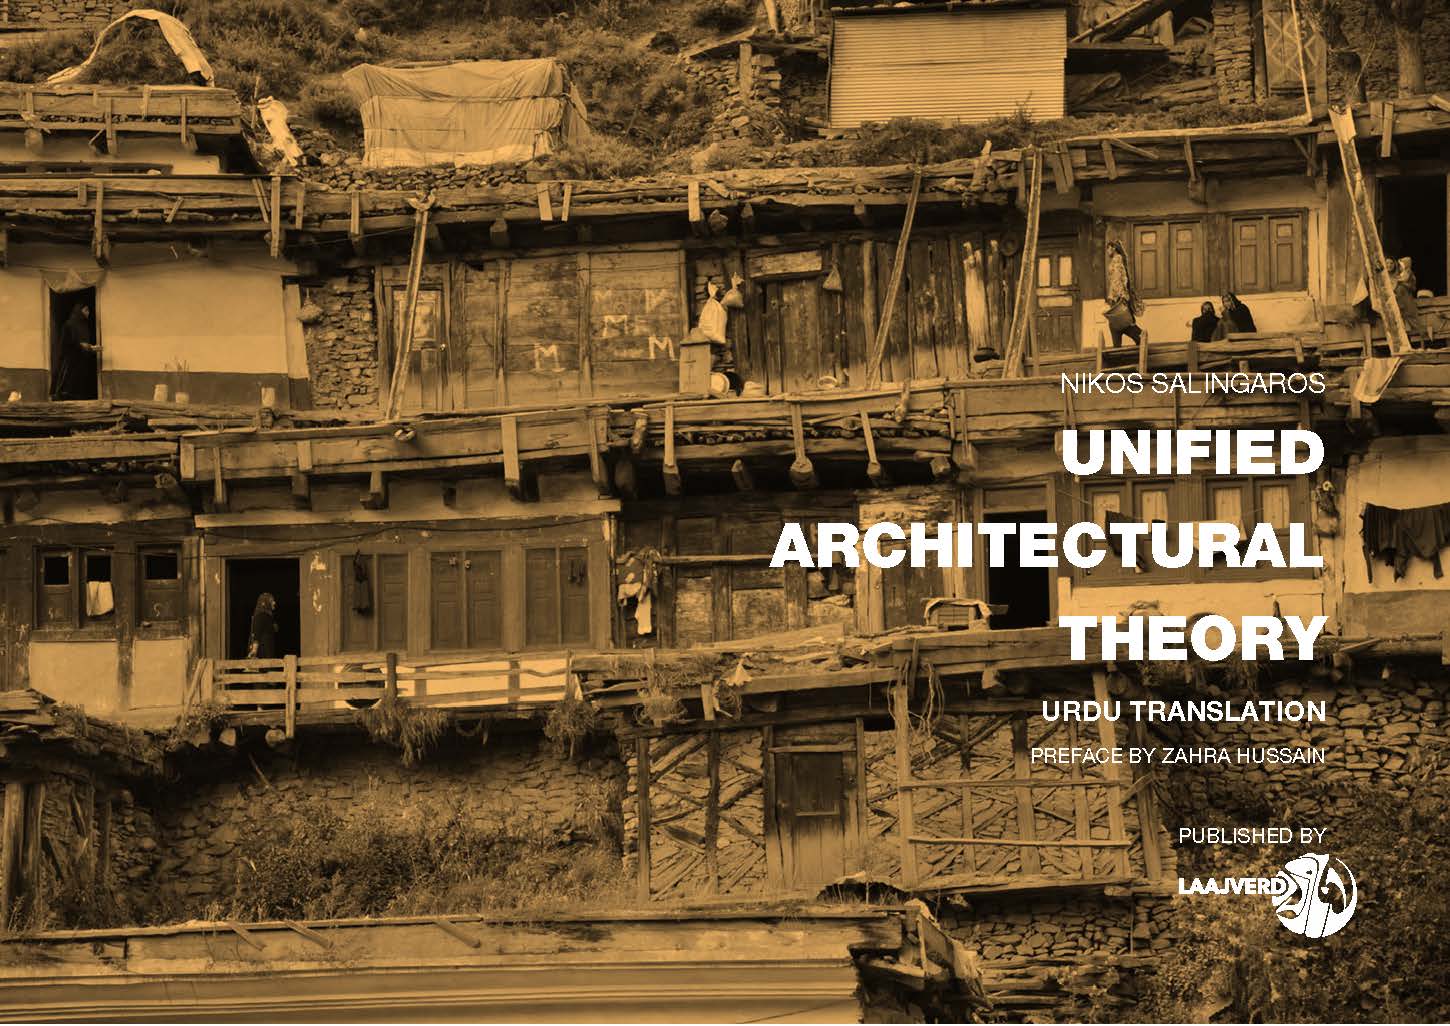 Zahra Hussain - <p><span style="font-style: italic;">Click the download button for the text in Urdu.&nbsp;</span></p><blockquote>"This booklet contains parts, but not
all, of my book <span style="font-style: italic;">Unified Architectural
Theory</span> (International English Edition
published by Vajra Books,
Kathmandu, Nepal, 2013). These
readings together present an
approach to architecture that is very
different from the way it is currently
taught, and suggest a new attitude
towards the discipline itself. For this
reason, I believe they can be quite
useful to architecture students in the
Urdu-speaking world.&nbsp;</blockquote><blockquote>There is another reason for this
translation. I wanted to reach out
beyond academic architecture (where
many people are schooled in English),
to those who cannot read my original
book. Widespread damage to culture
occurs when common people are
influenced by extractive globalism to
build against human nature, and
politicians approve monstrous
buildings just because they see those
images in the media. The Urdu speaking
world has a beautiful
tradition of architecture set in a
characteristically complex urban
fabric, and contemporary architects
and urbanists should pay more
attention to those. I hope that after
reading this book, clients and local
government officials can feel secure
enough to respect their local
architectural traditions. Backed by the
arguments that I offer, intelligent
people can insist that thousands of
years of culture, including practical
knowledge about low-cost
sustainability, not be violated by
flashy and unsustainable alien
importations.&nbsp;</blockquote><blockquote>I profoundly thank Zahra Hussain,
through whose invaluable help this
work can now reach a wider audience
in the Urdu-speaking world. I am
extremely happy to present this novel
approach to building and design to a
new generation of young architects."</blockquote><div>--Nikos Salingaros, November 2016<br></div>